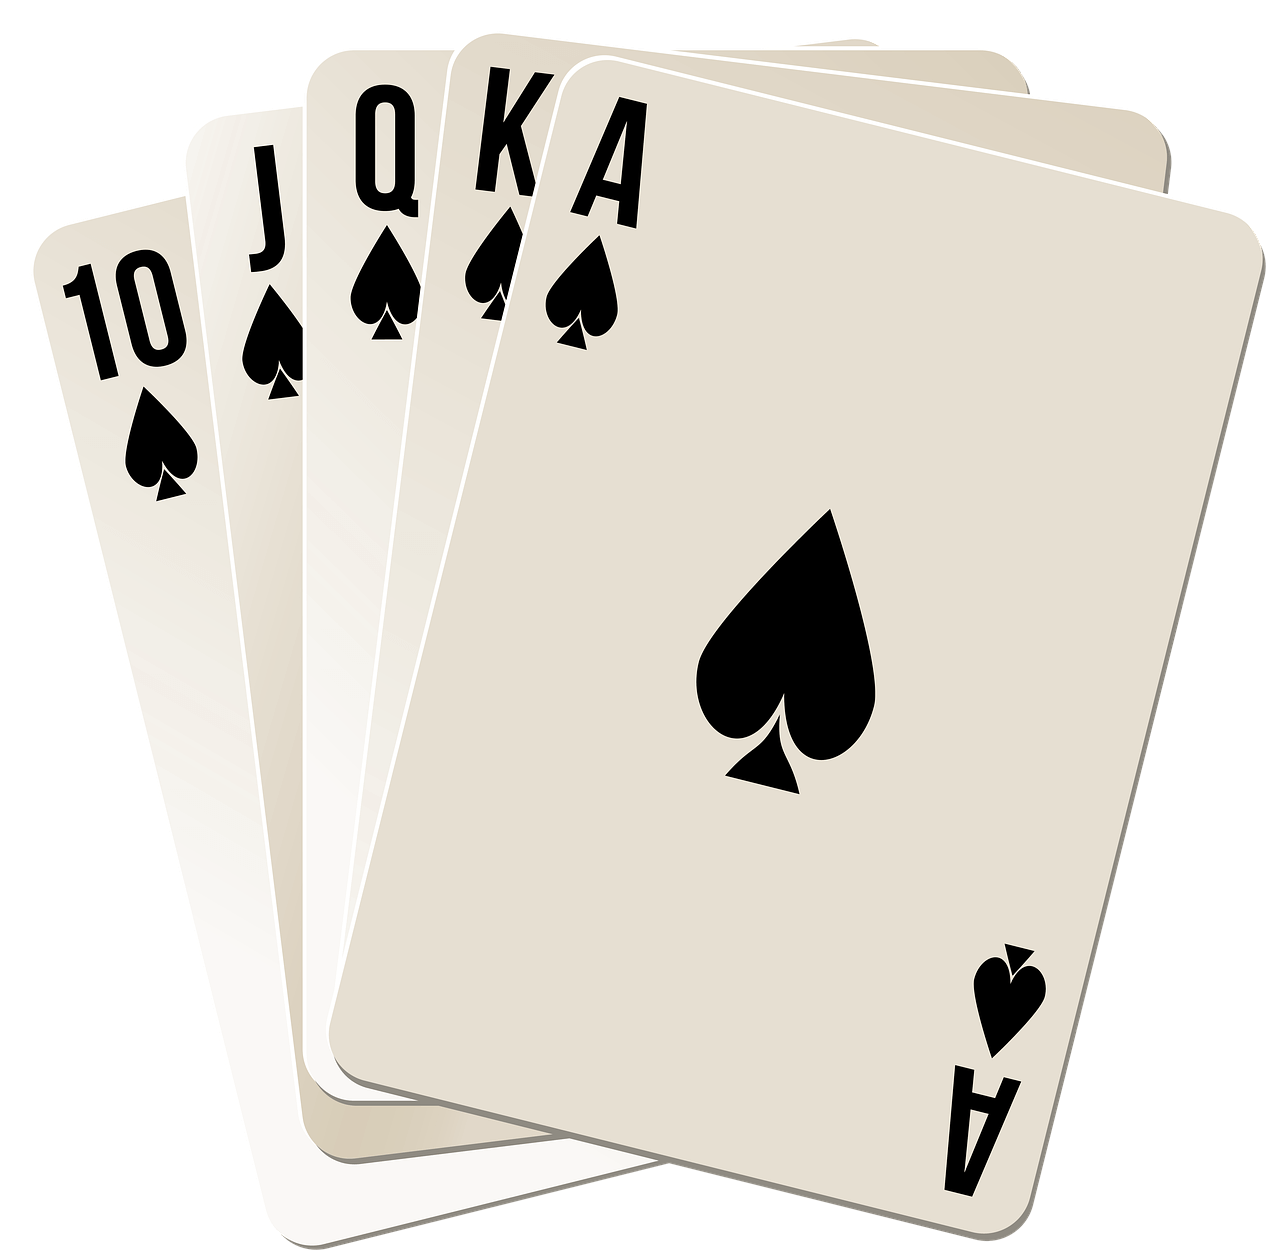 What is Clear (Poker Term) and Its Impact on the Game